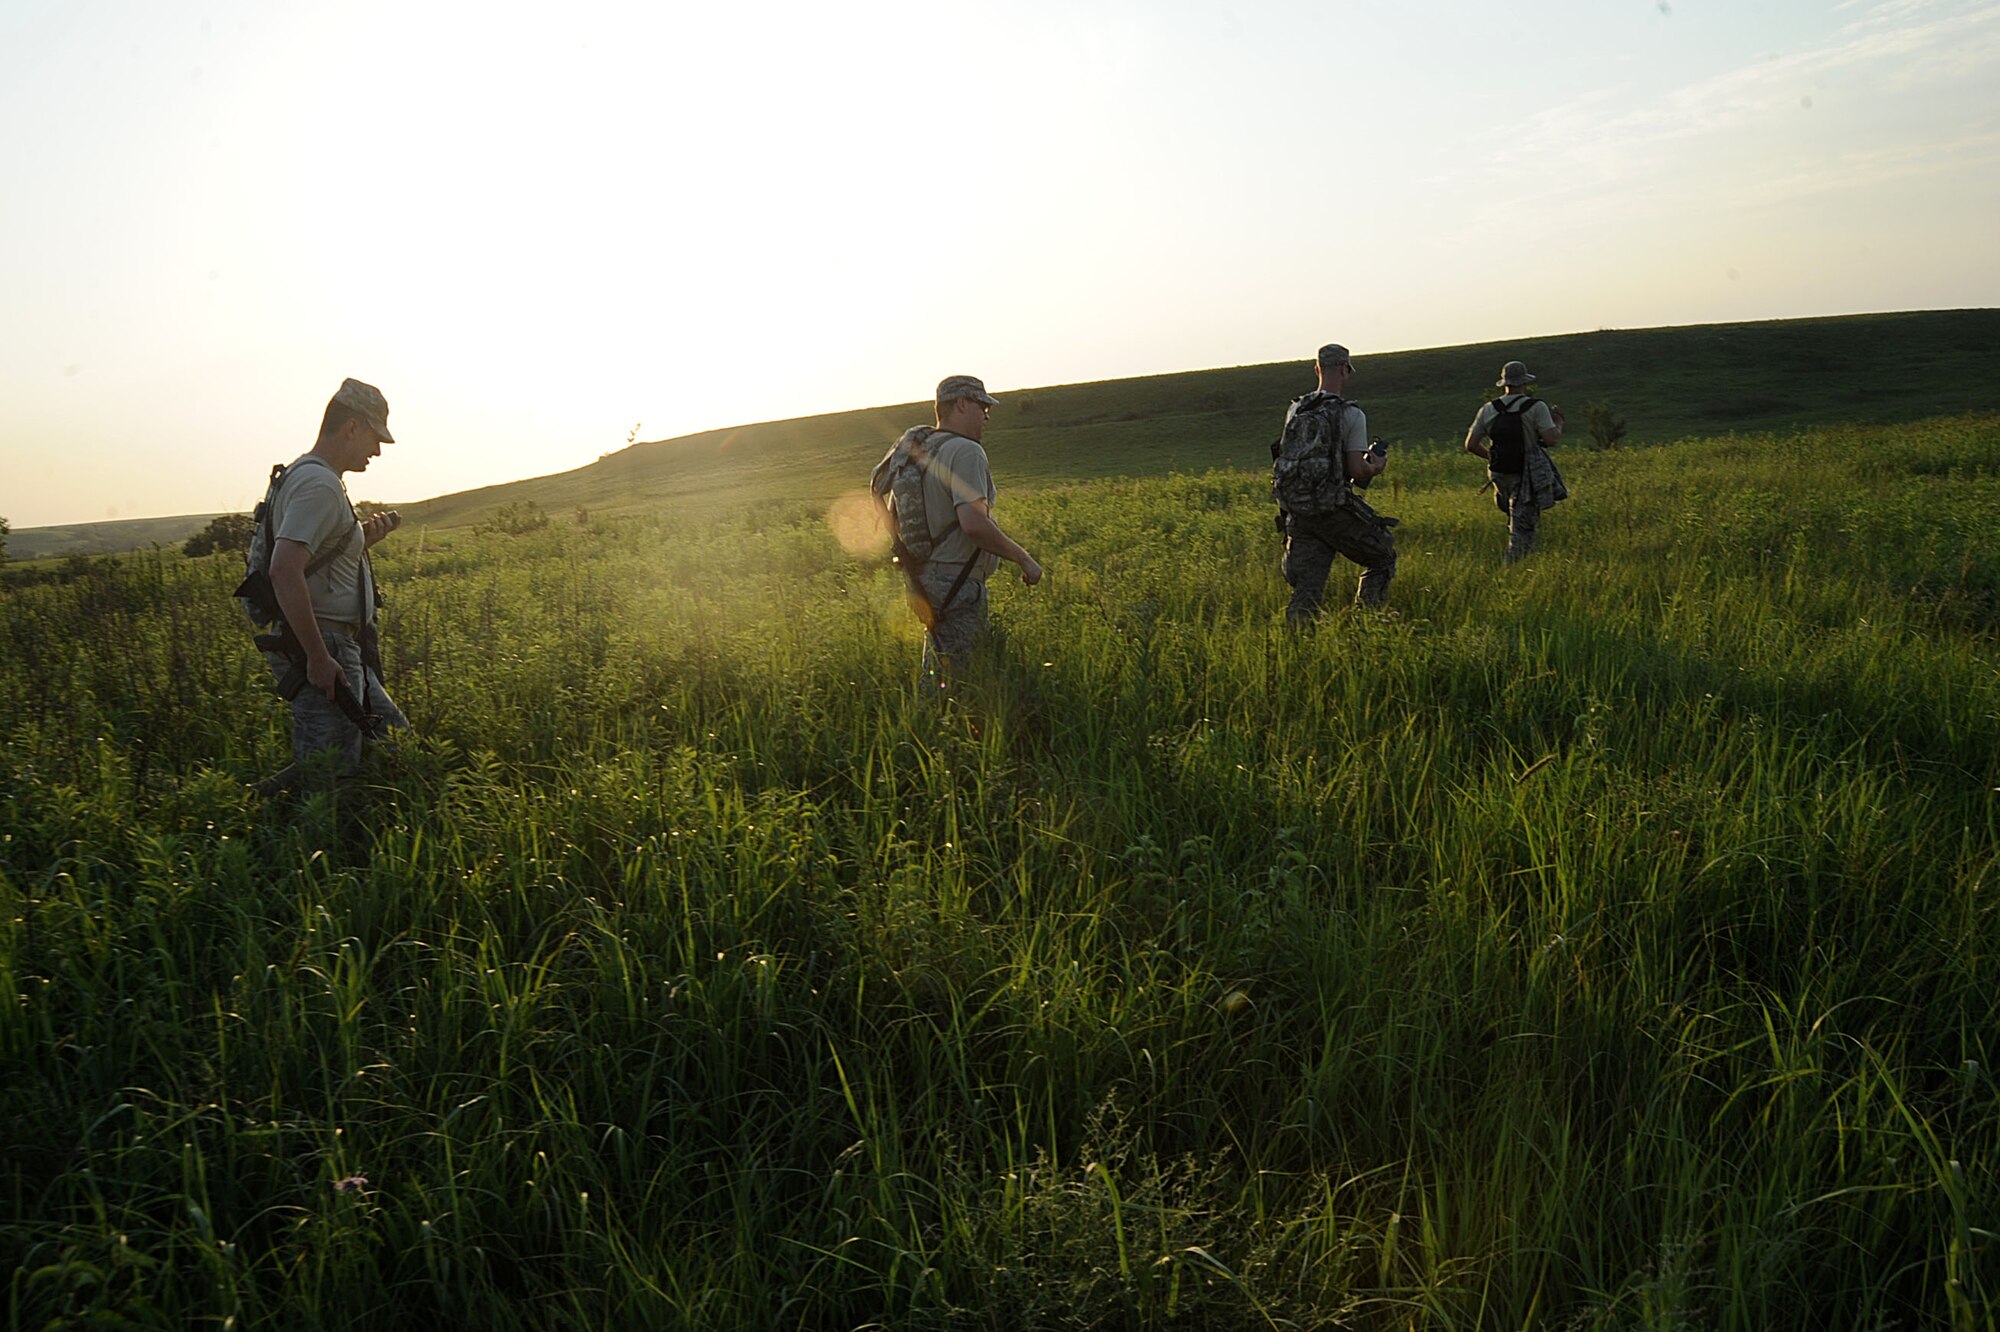 Tenth Air Support Operations Squadron joint terminal attack controllers march through a field during land navigation operations, June 22, 2016, at Fort Riley, Kan. Tenth ASOS JTAC Airmen participated in a field training exercise facilitated to ensure all Airmen are currently proficient, physically fit and mentally prepared to conduct full-spectrum close air support operations with unified combatant commands world-wide. (U.S. Air Force photo/Airman 1st Class Jenna K. Caldwell)